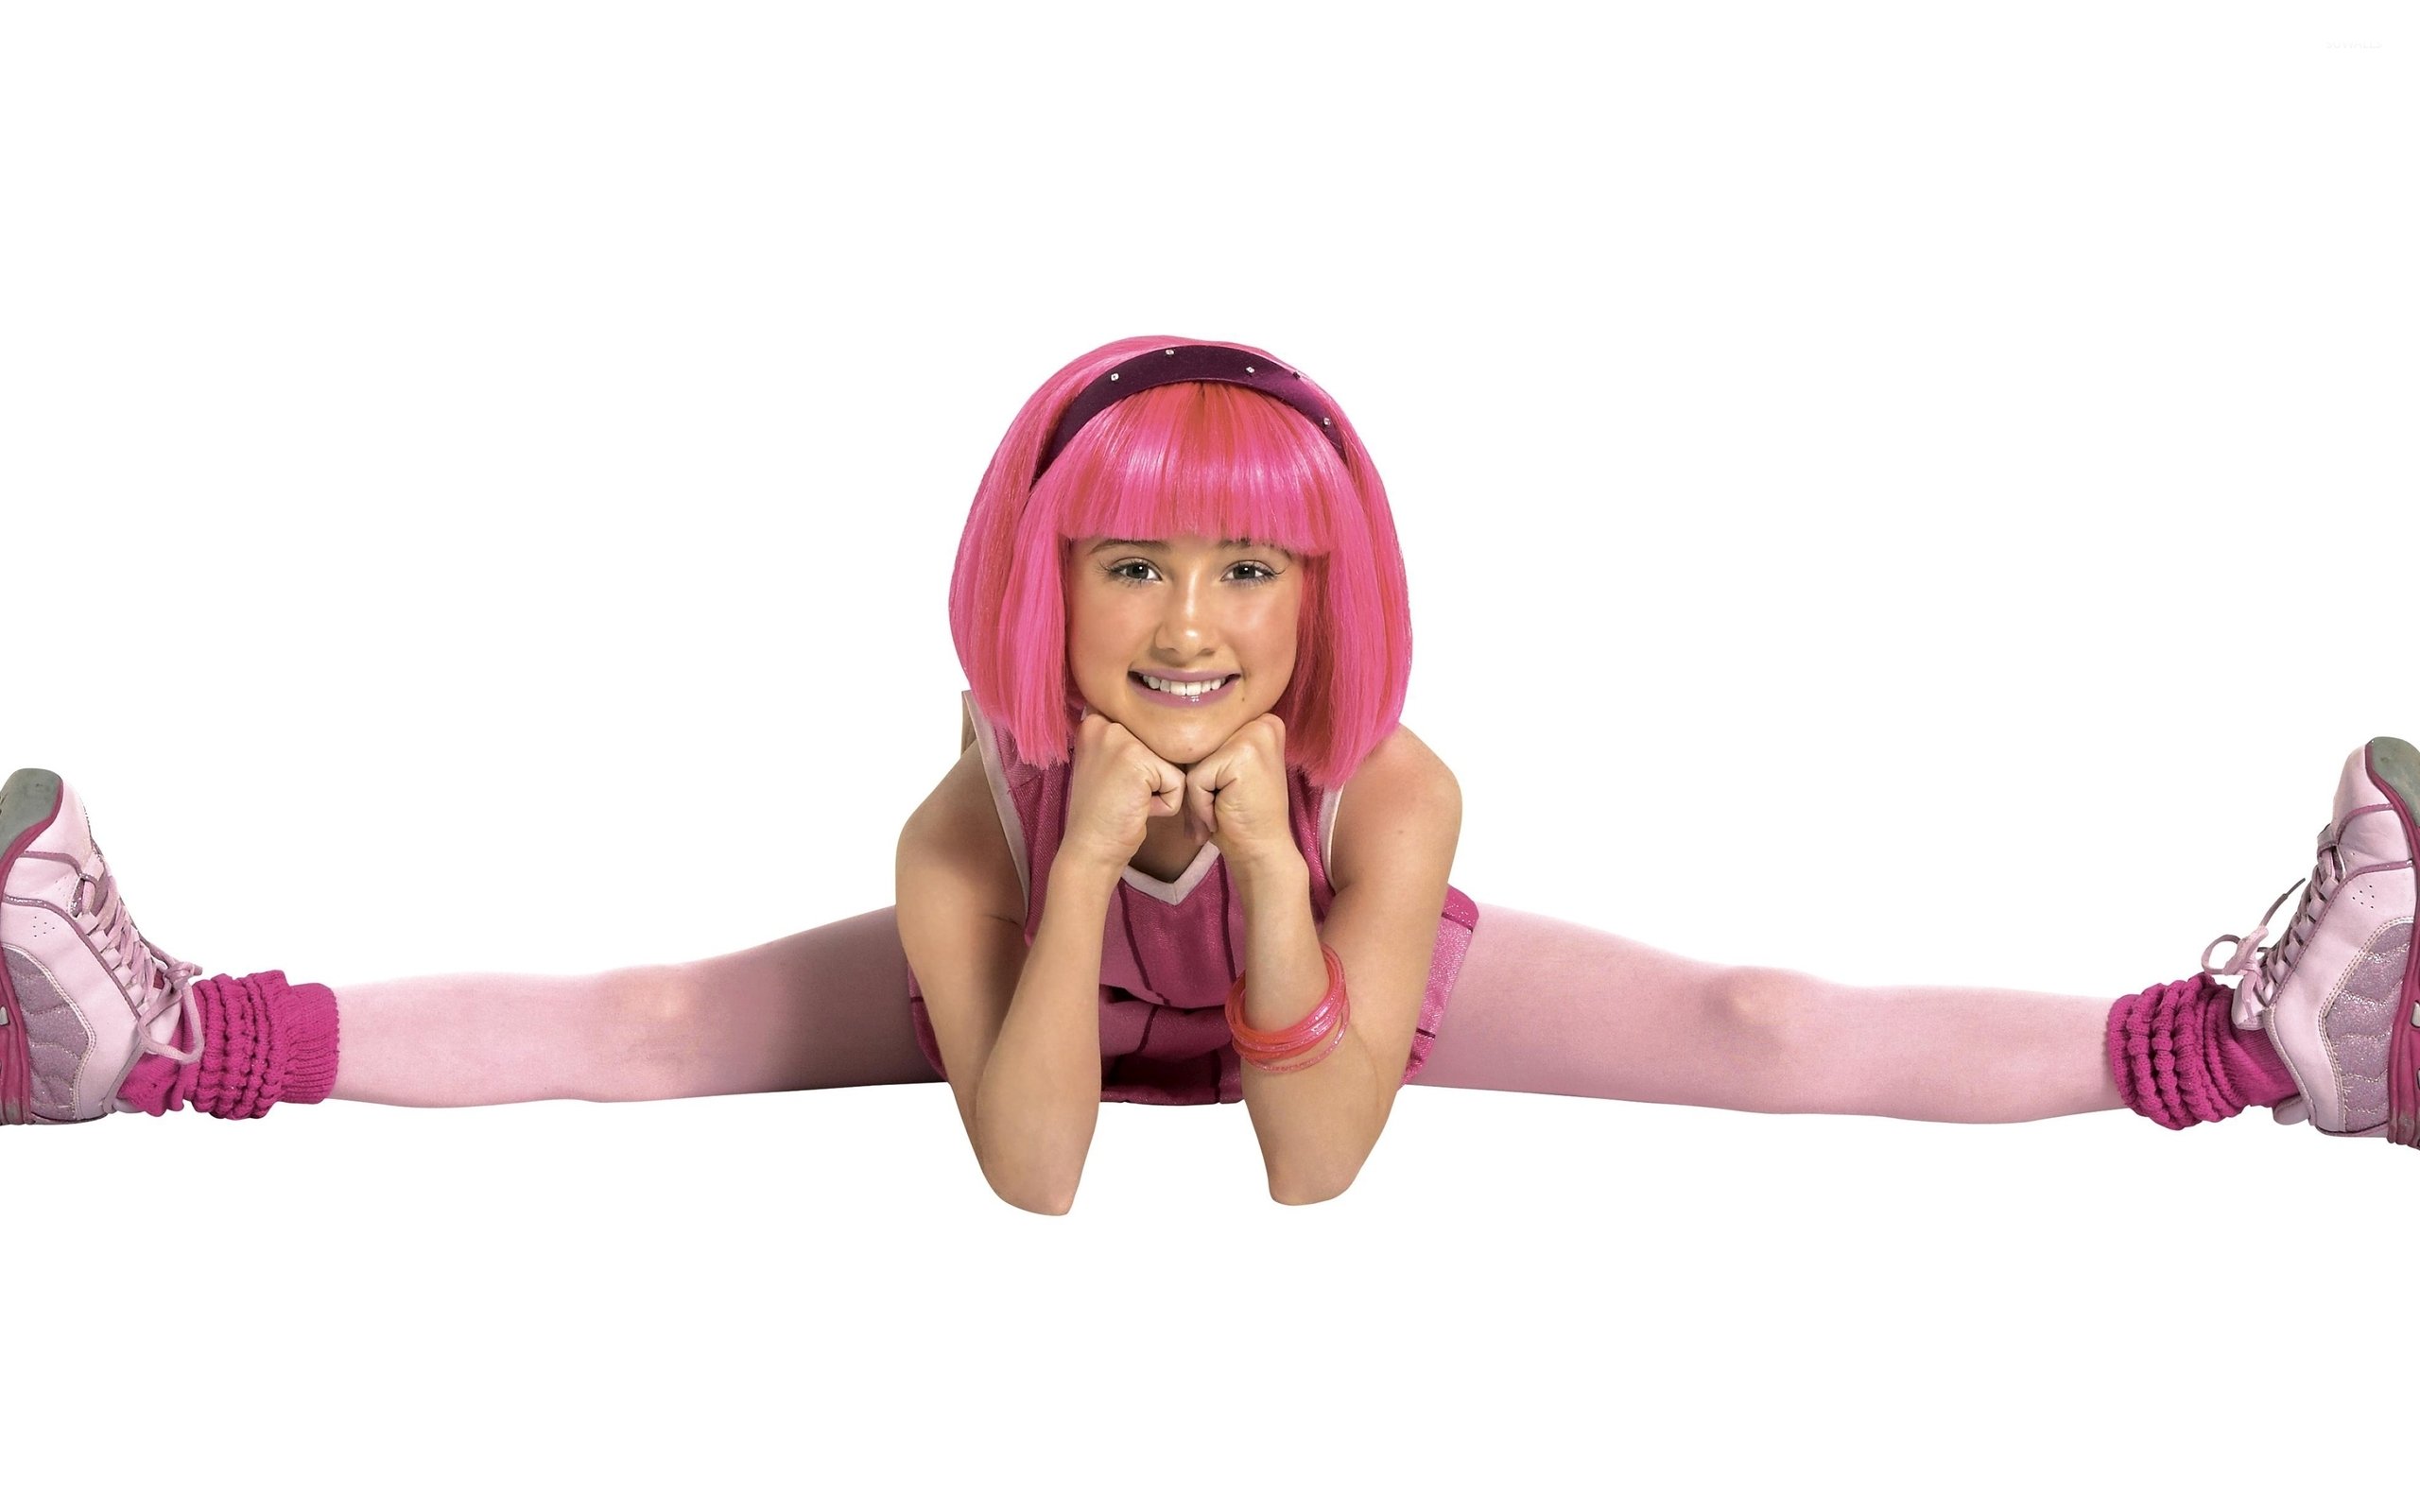 autumn schneider recommends stephanie from lazytown naked pic